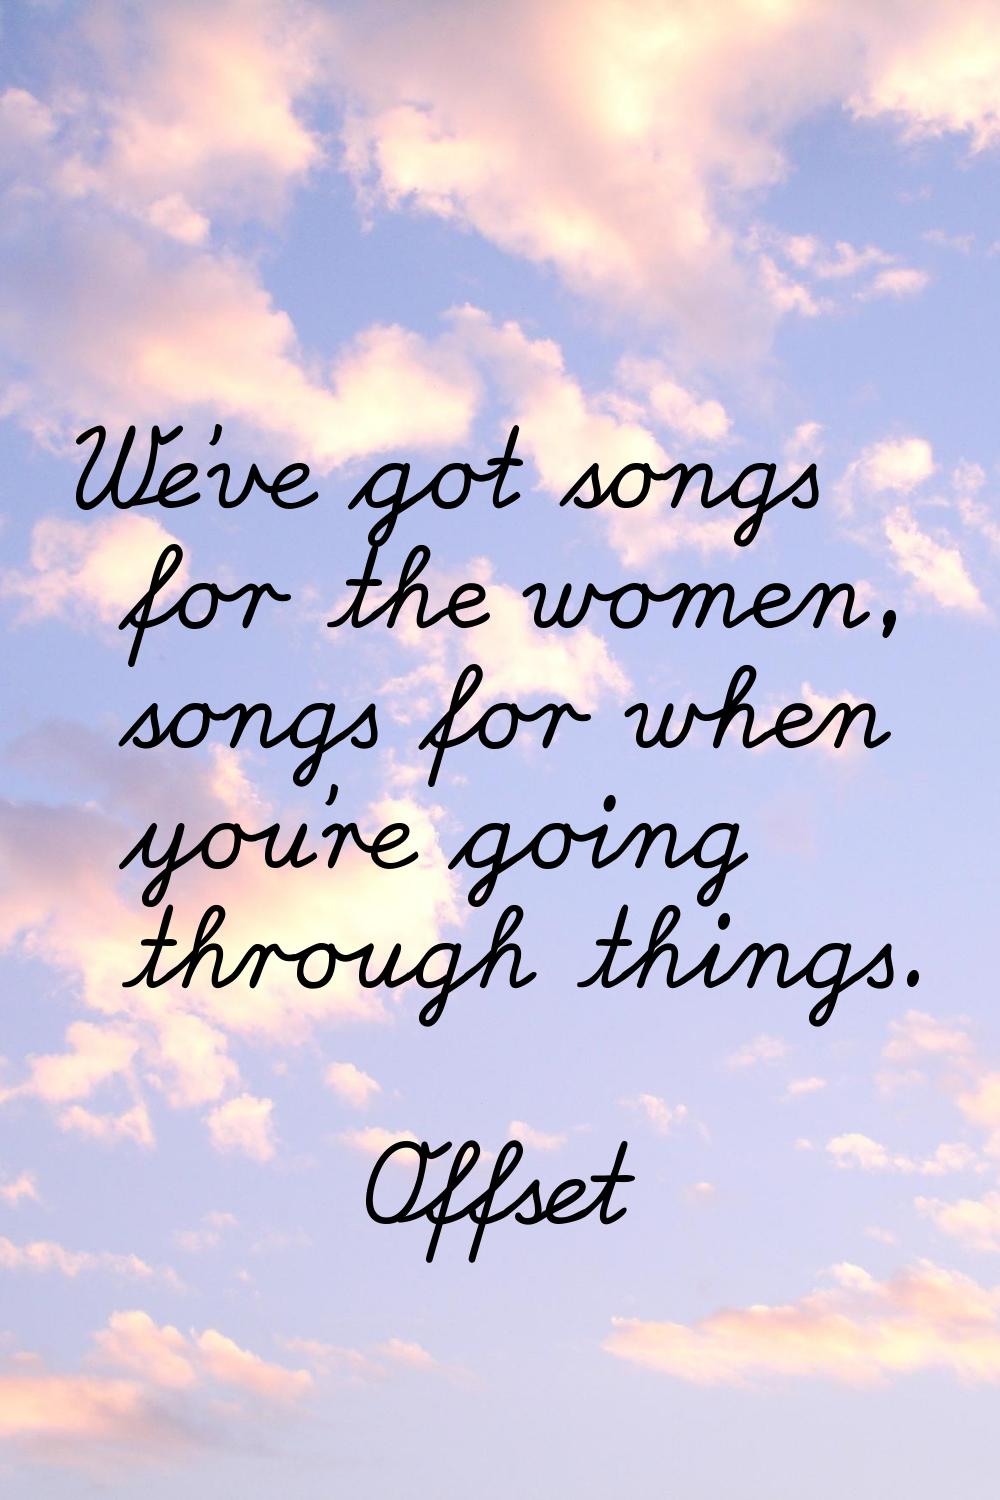 We've got songs for the women, songs for when you're going through things.